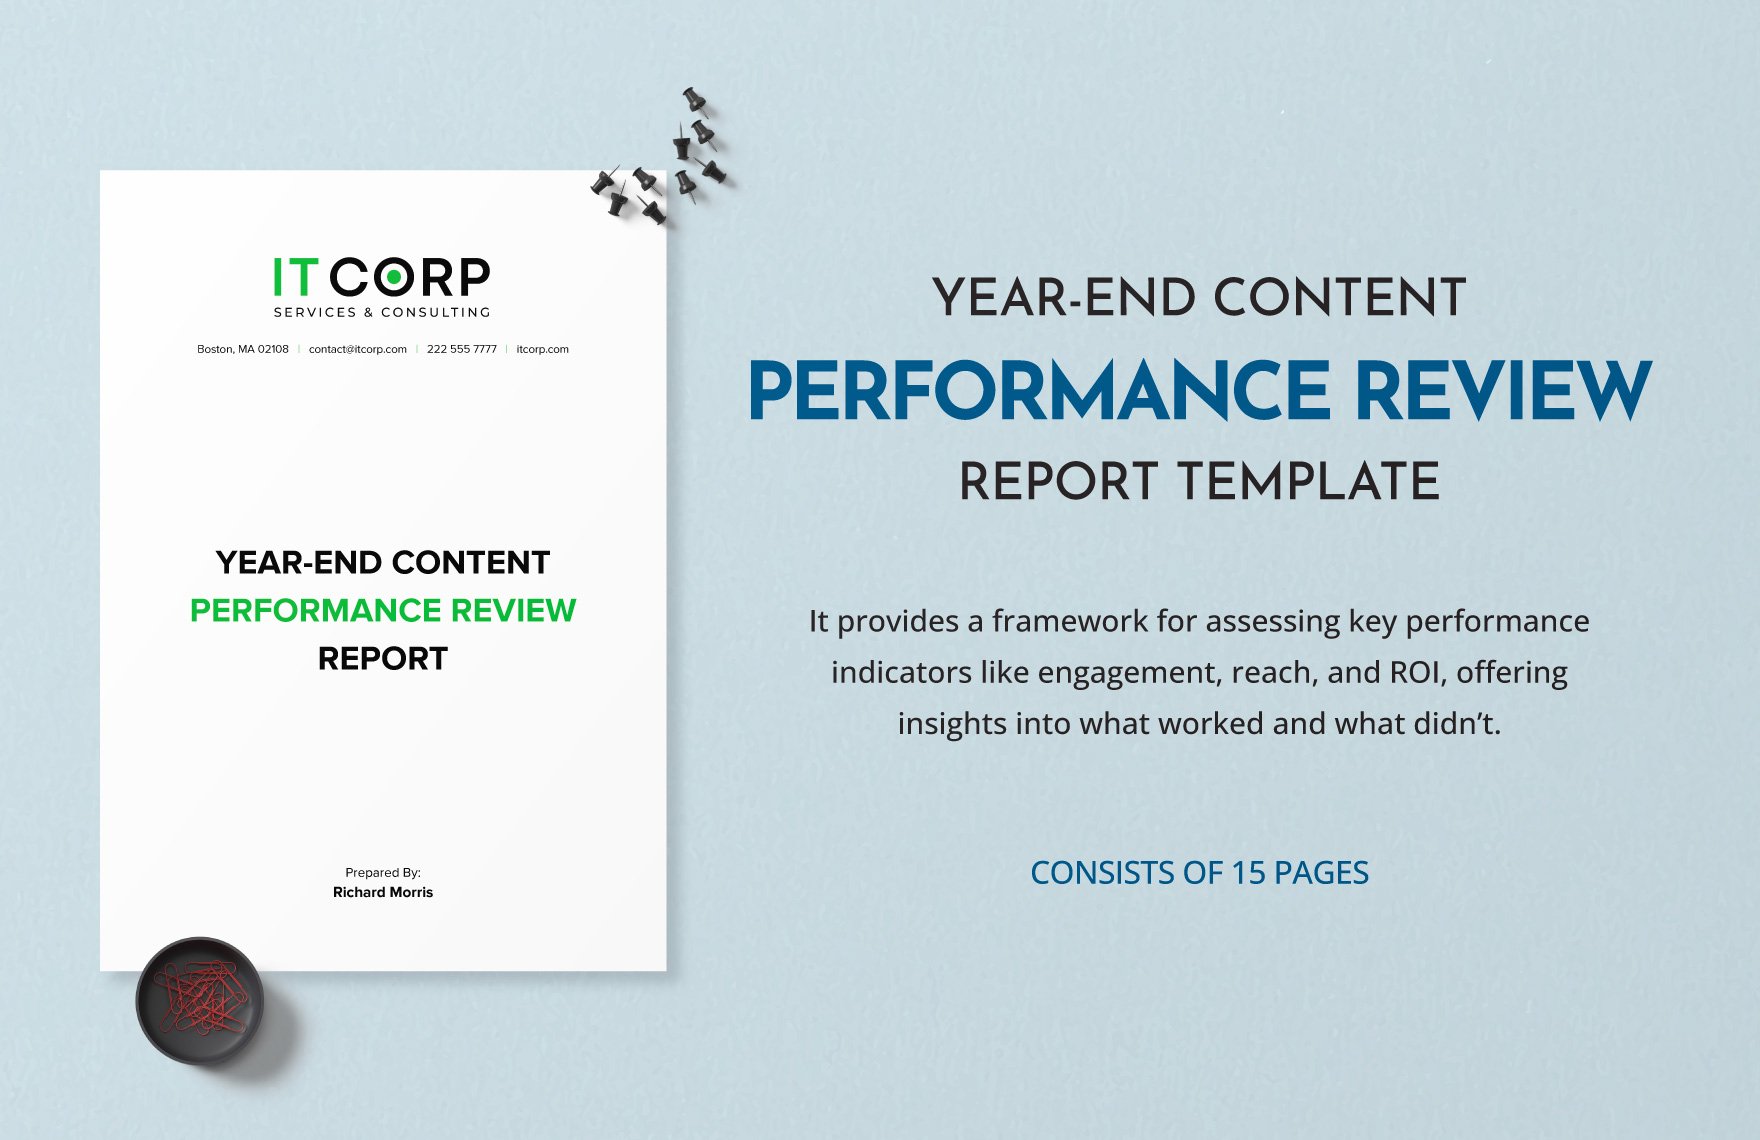 Year-end Content Performance Review Report Template